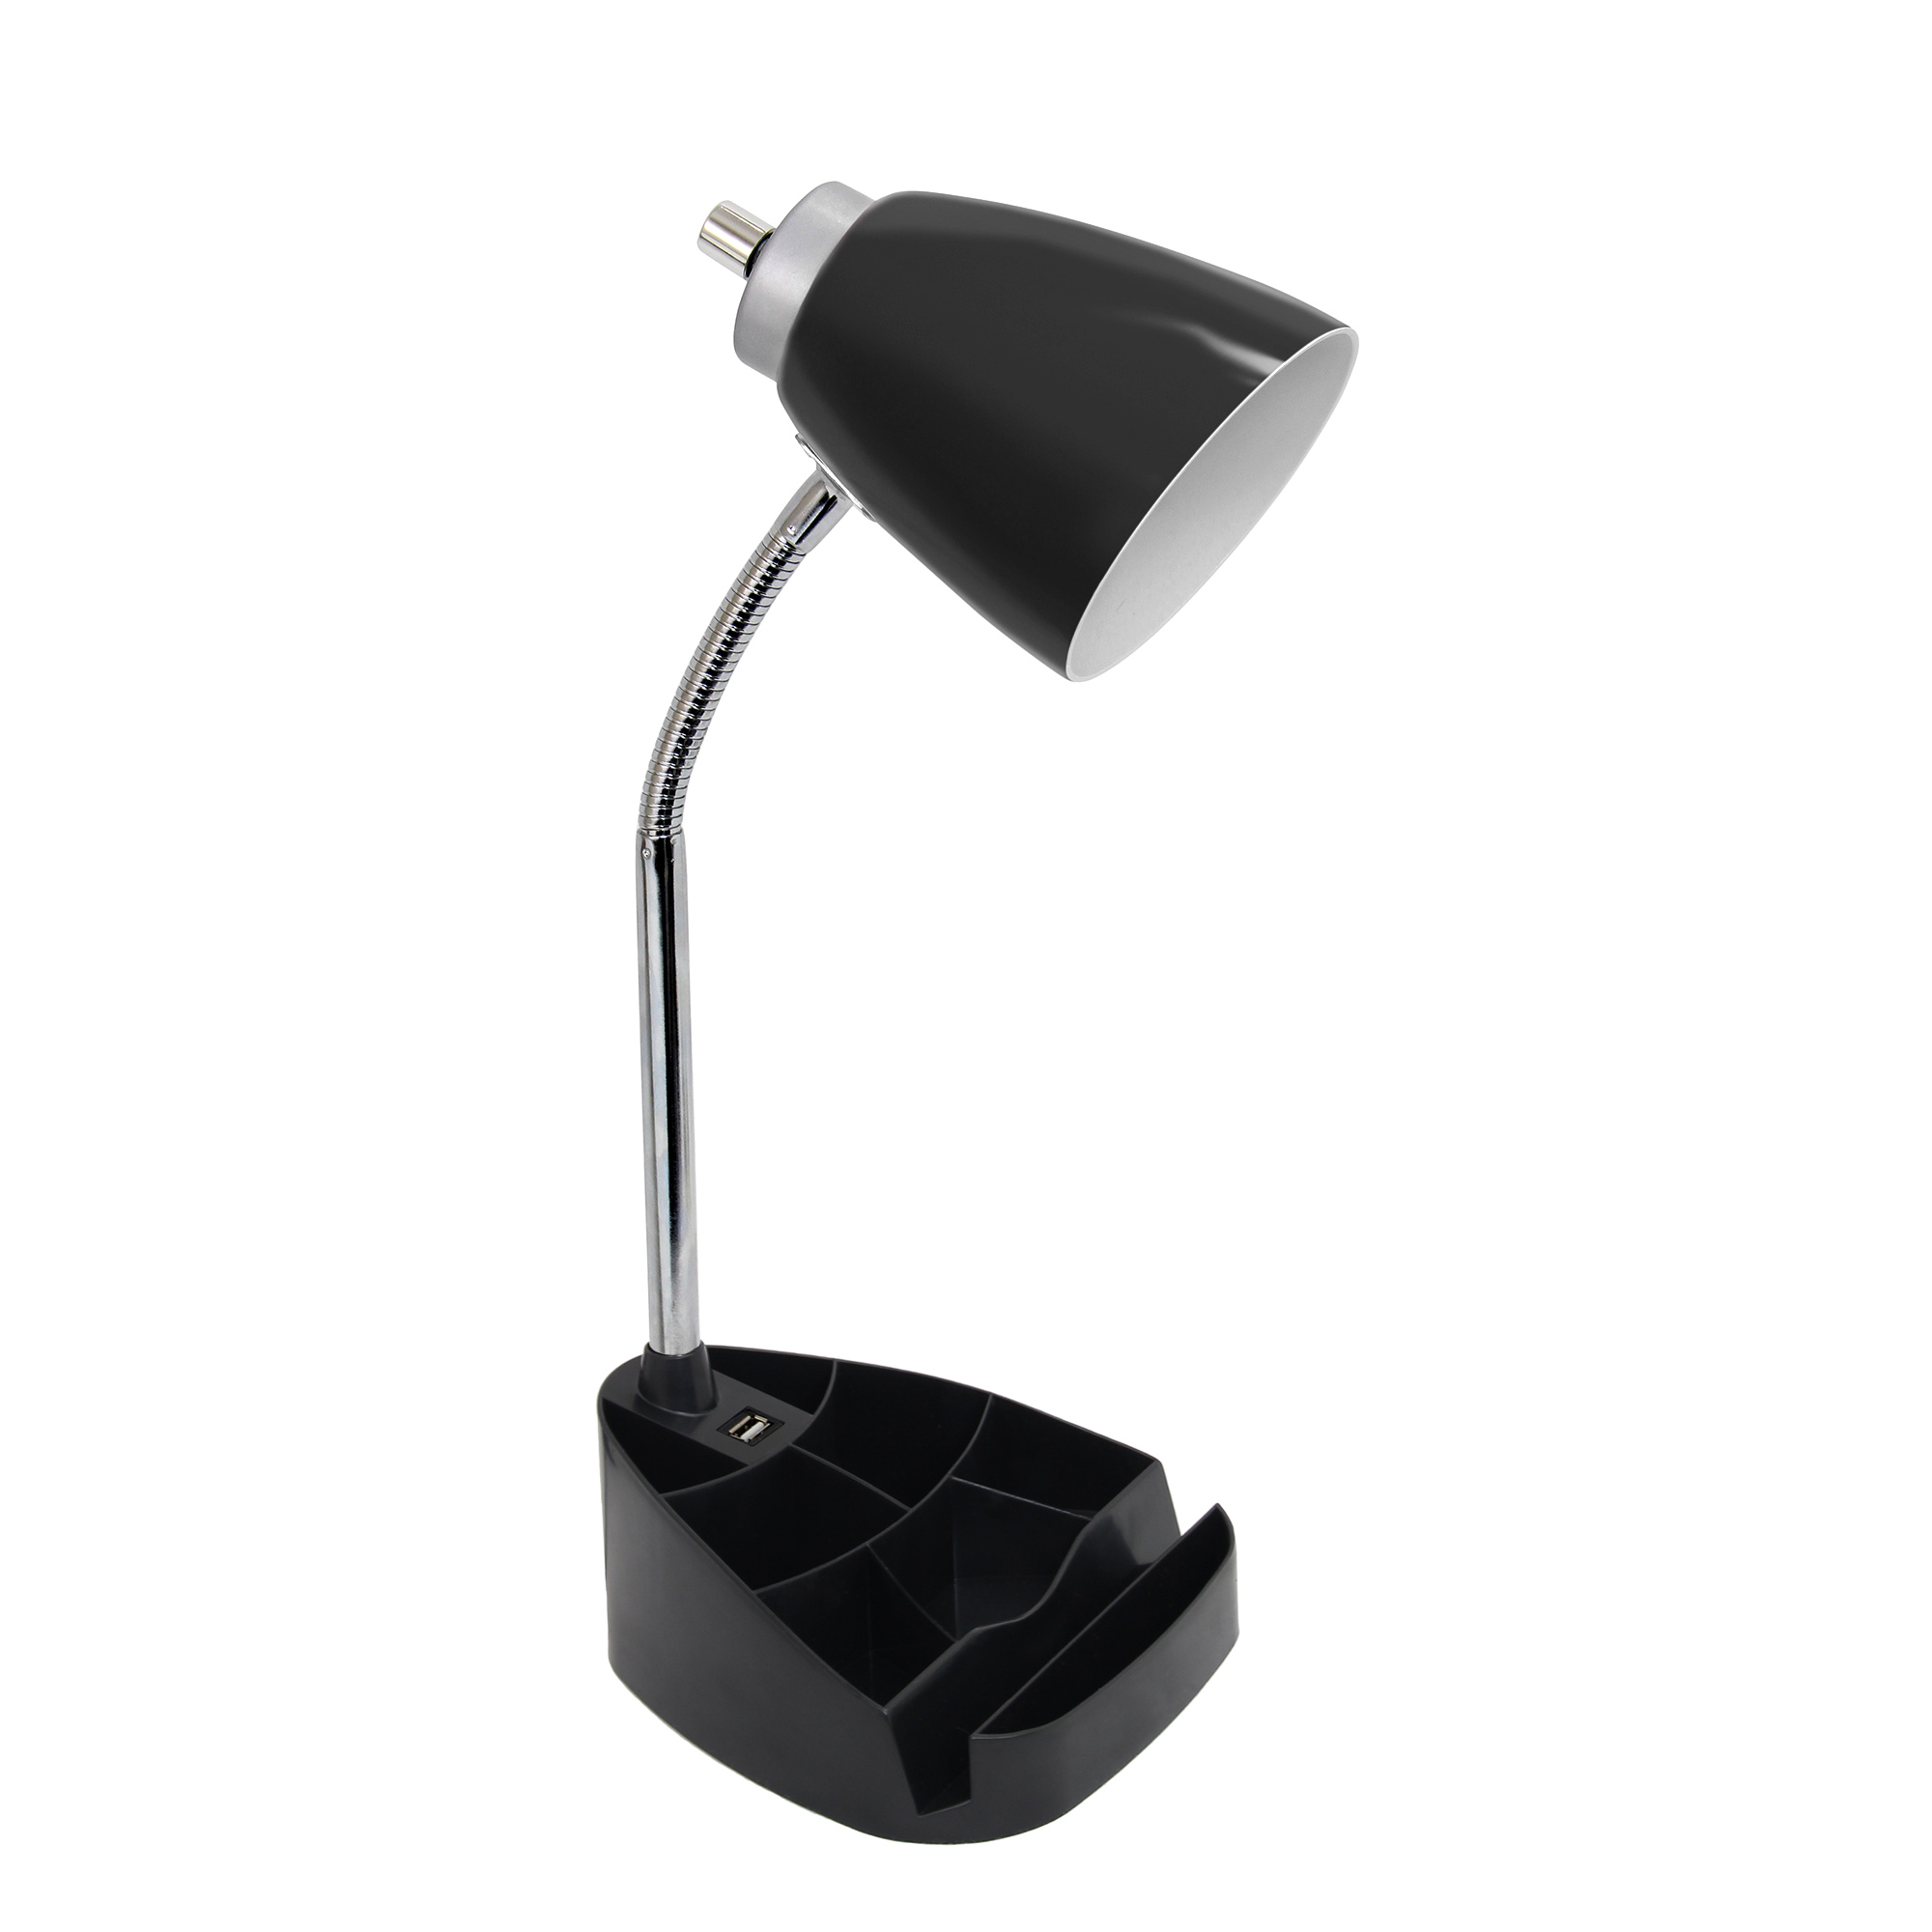 Simple Designs Gooseneck Organizer Desk Lamp with iPad Tablet Stand Book Holder and USB port, Black